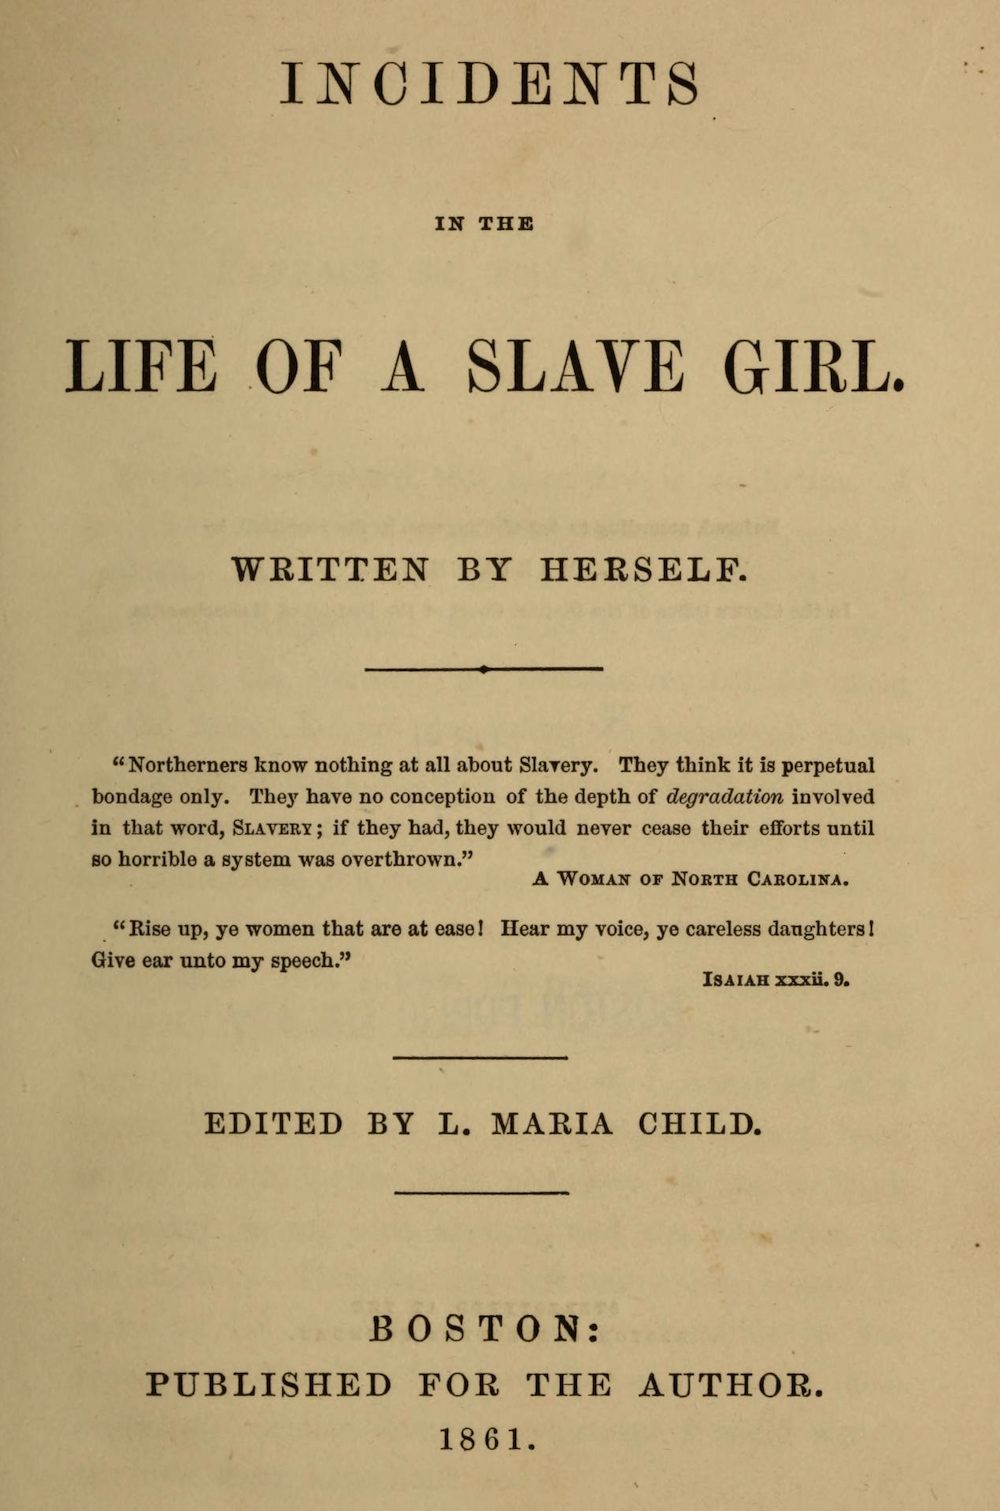 Incidents in the life of a slave girl free essays